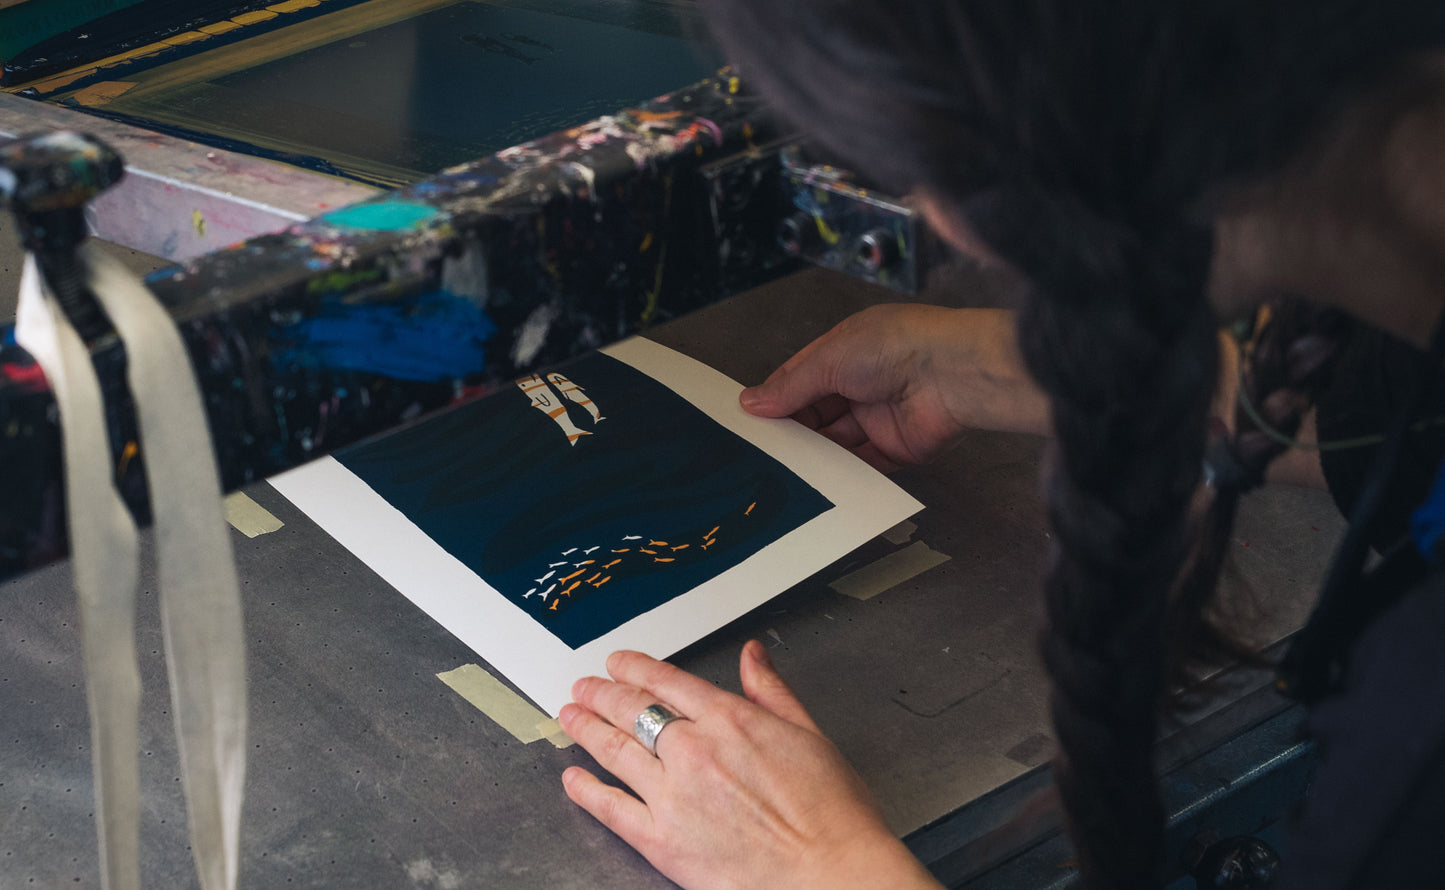 "Screen Print Your Own Textile Designs" Workshop - in Berlin, Germany